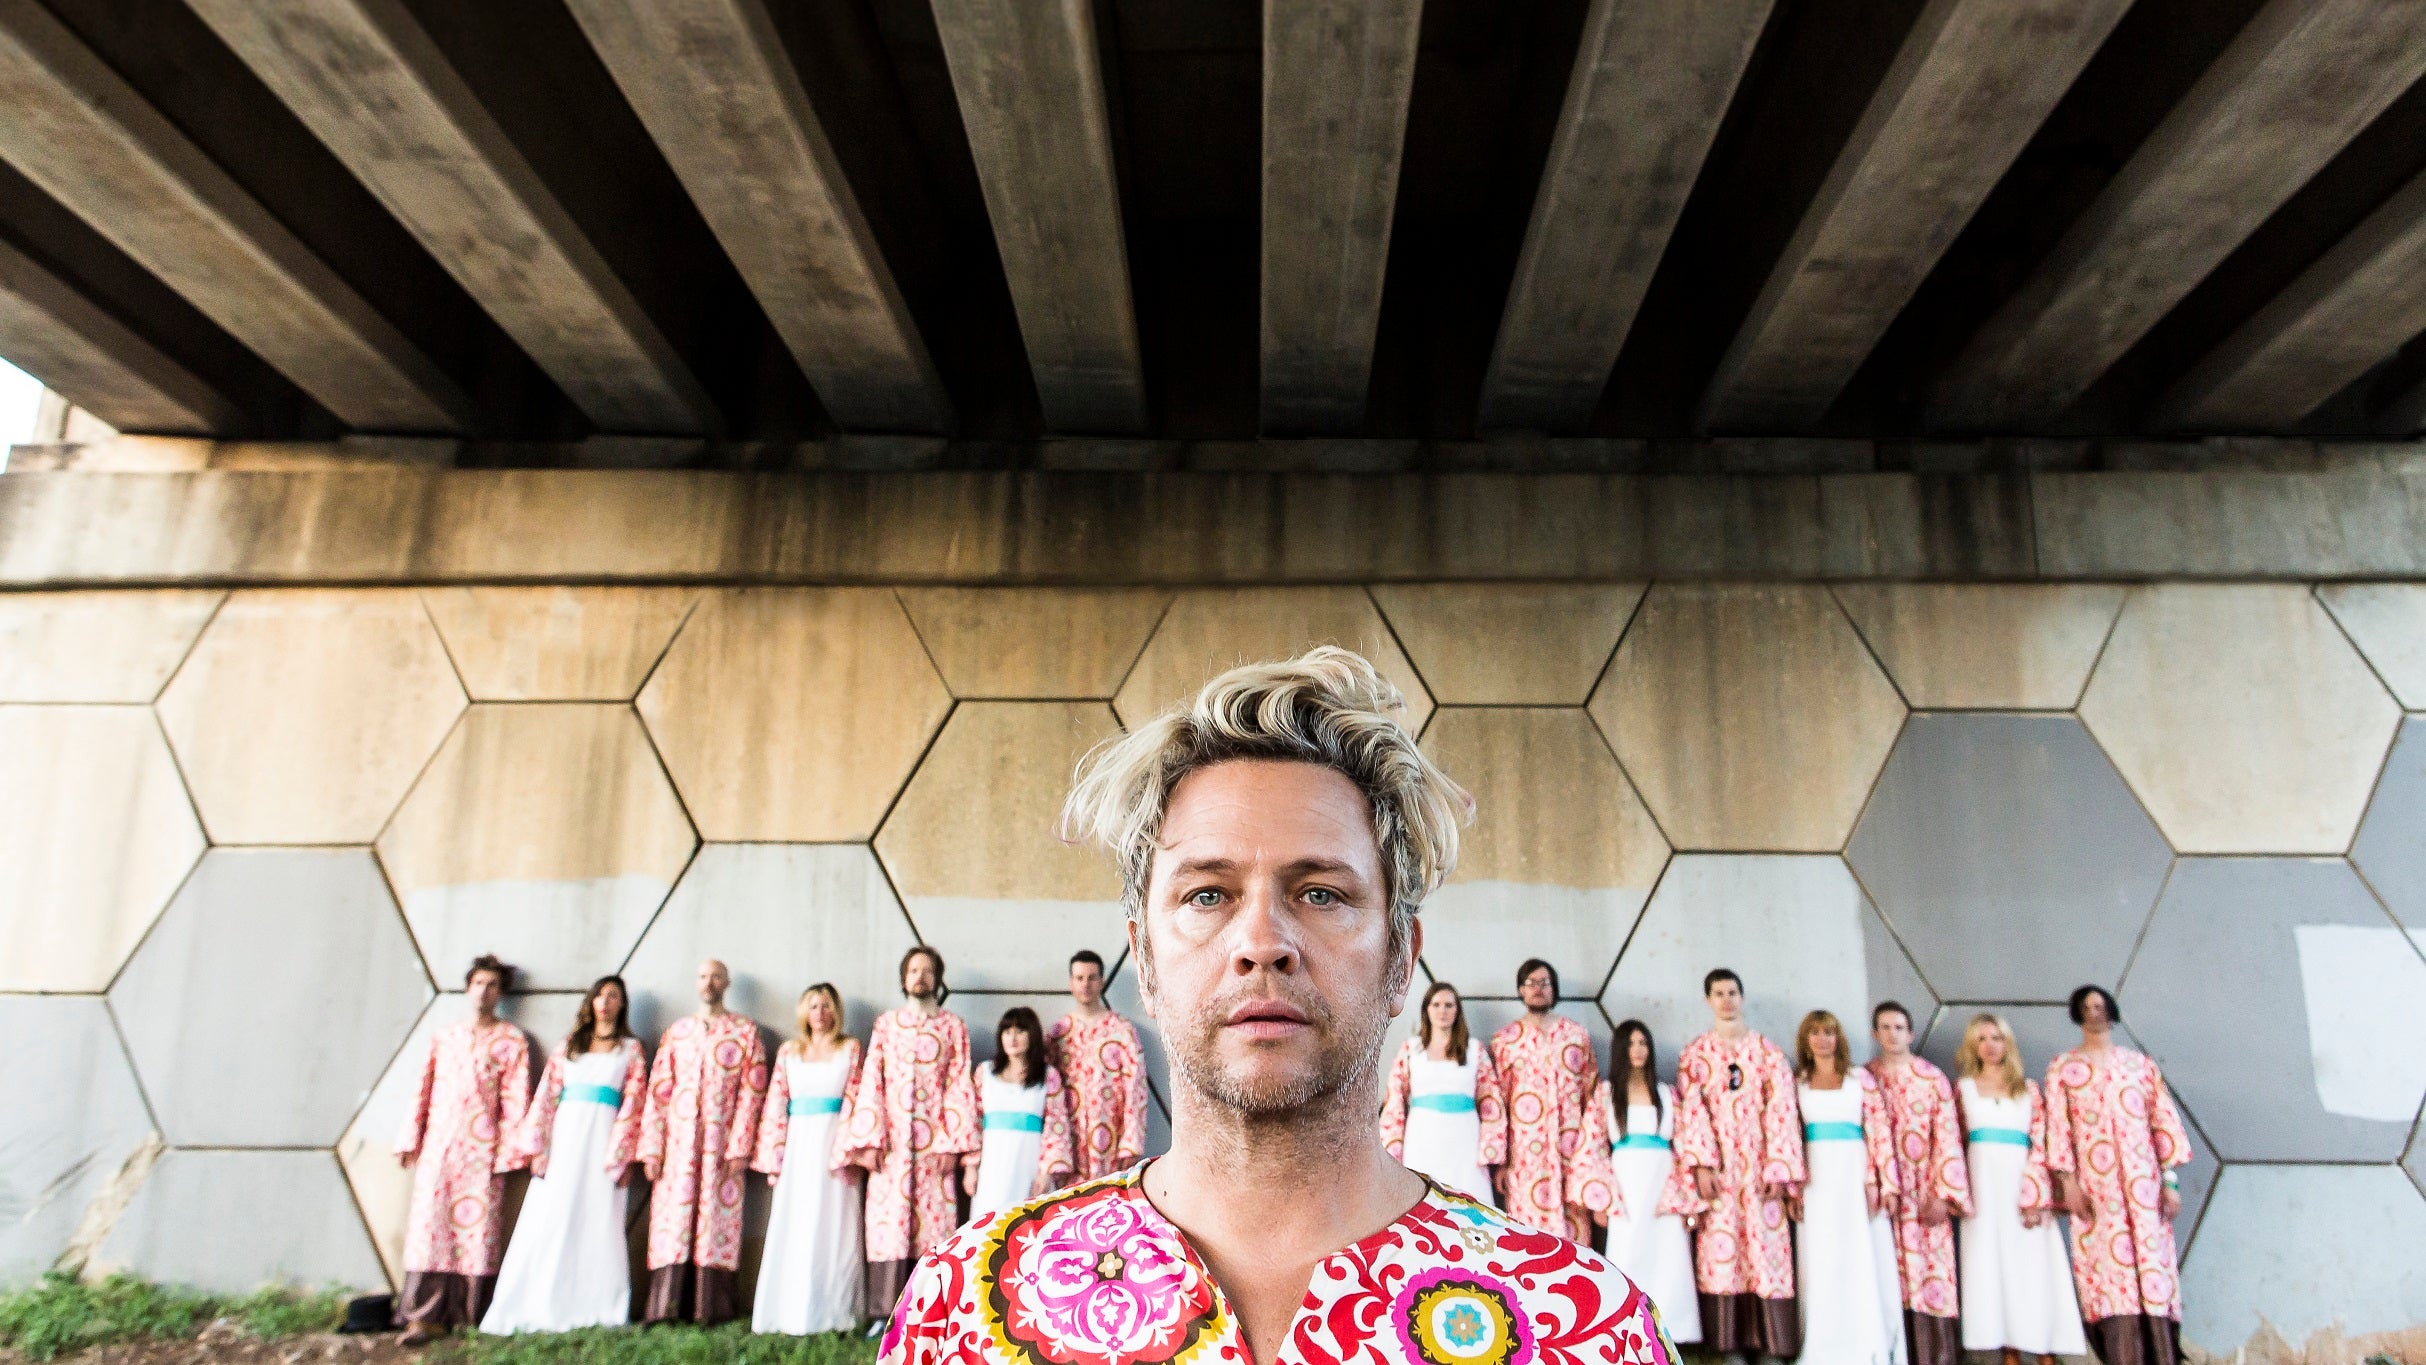 The Polyphonic Spree @ 191 Toole at 191 Toole